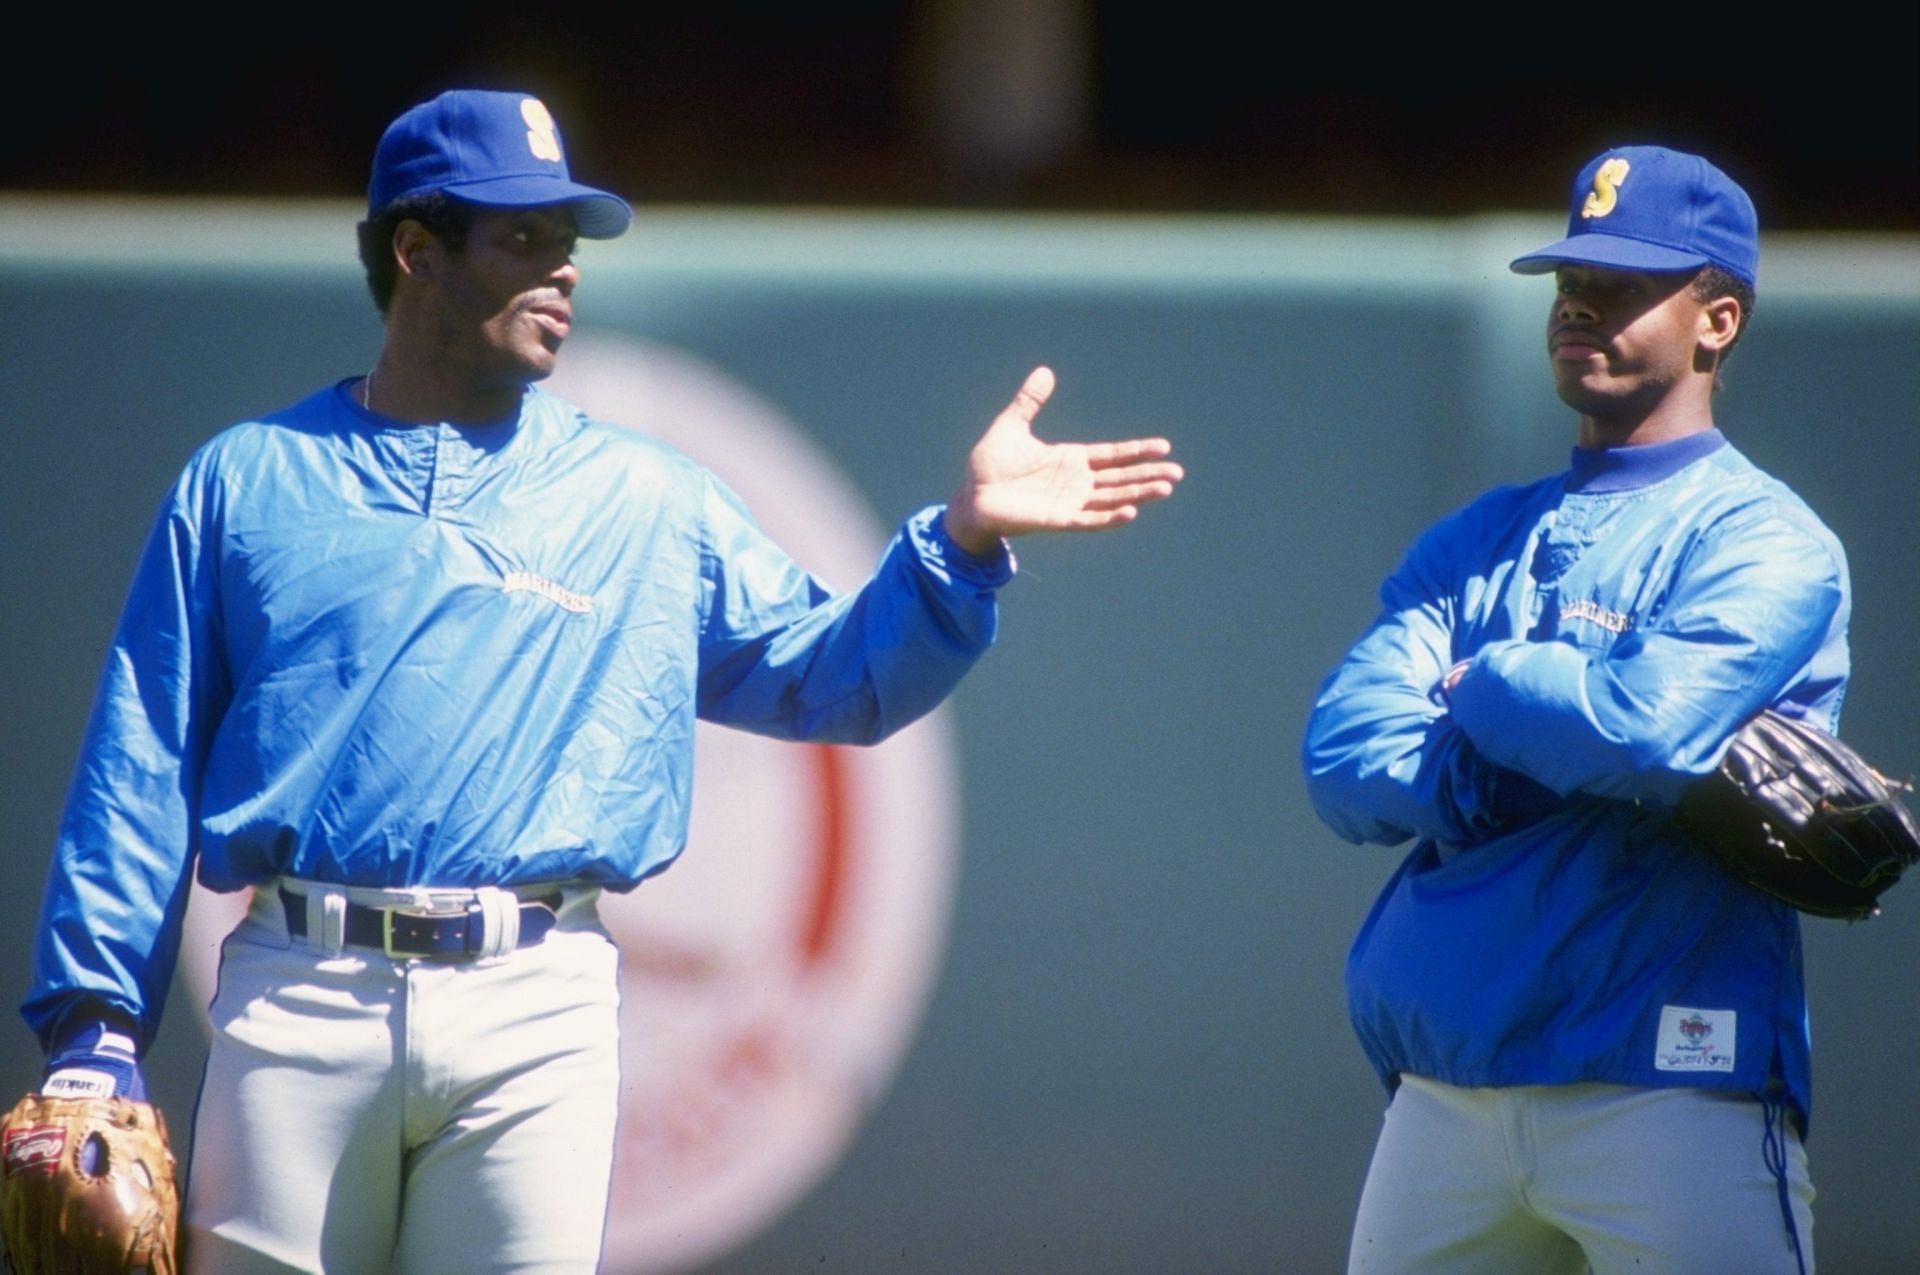 Ken Griffey Sr. and Ken Griffey Jr. playing for the Seattle Mariners